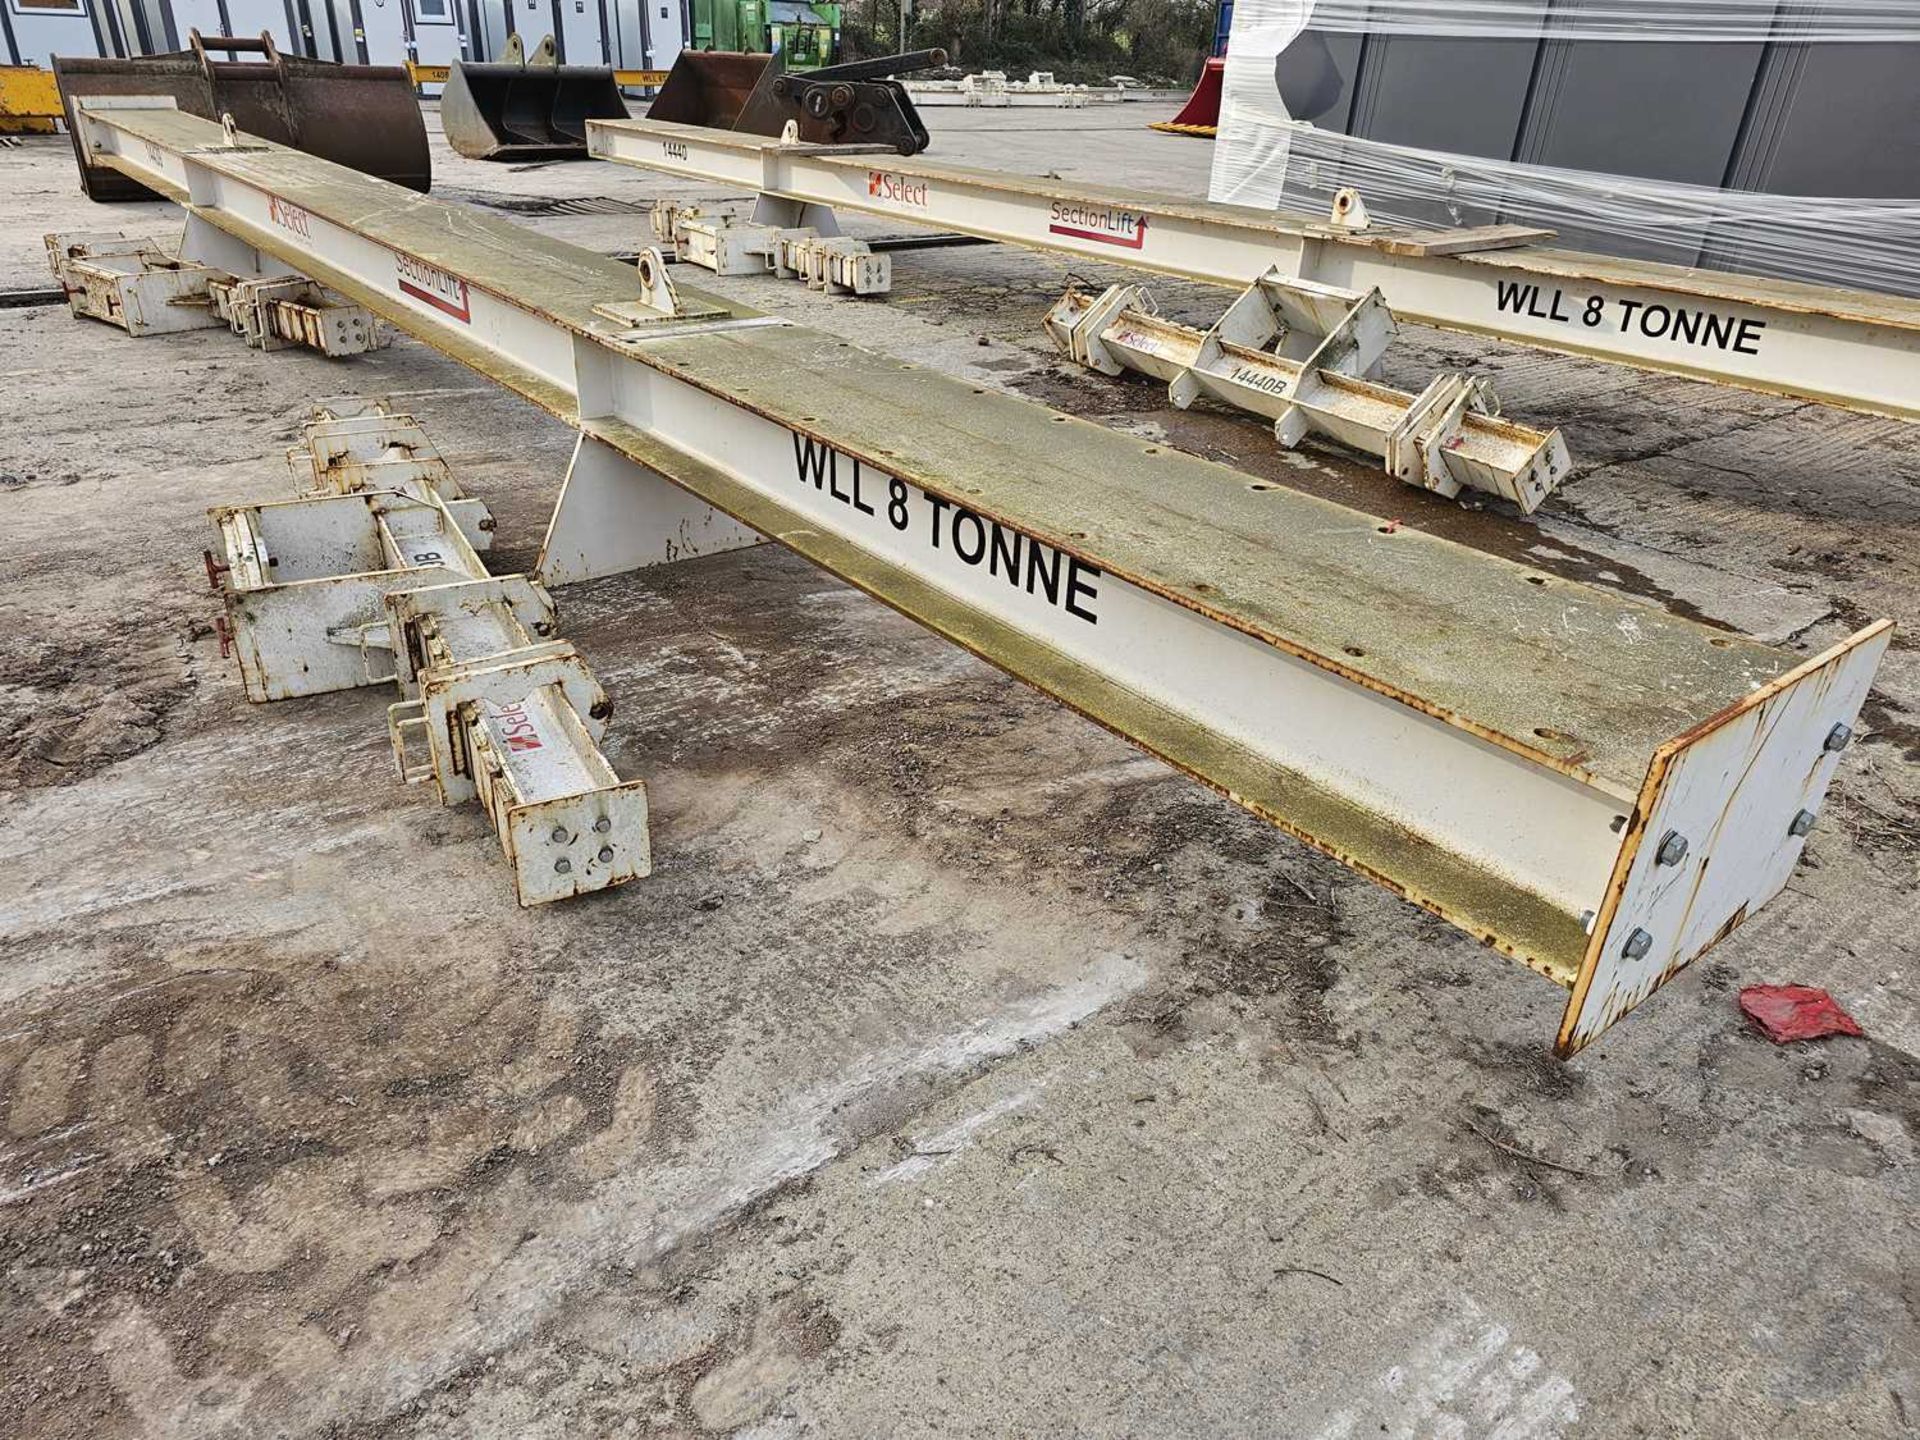 2019 Section Lift 10.65m x 2.5m Adjustable 8 Ton Spreader Beam - Image 3 of 7